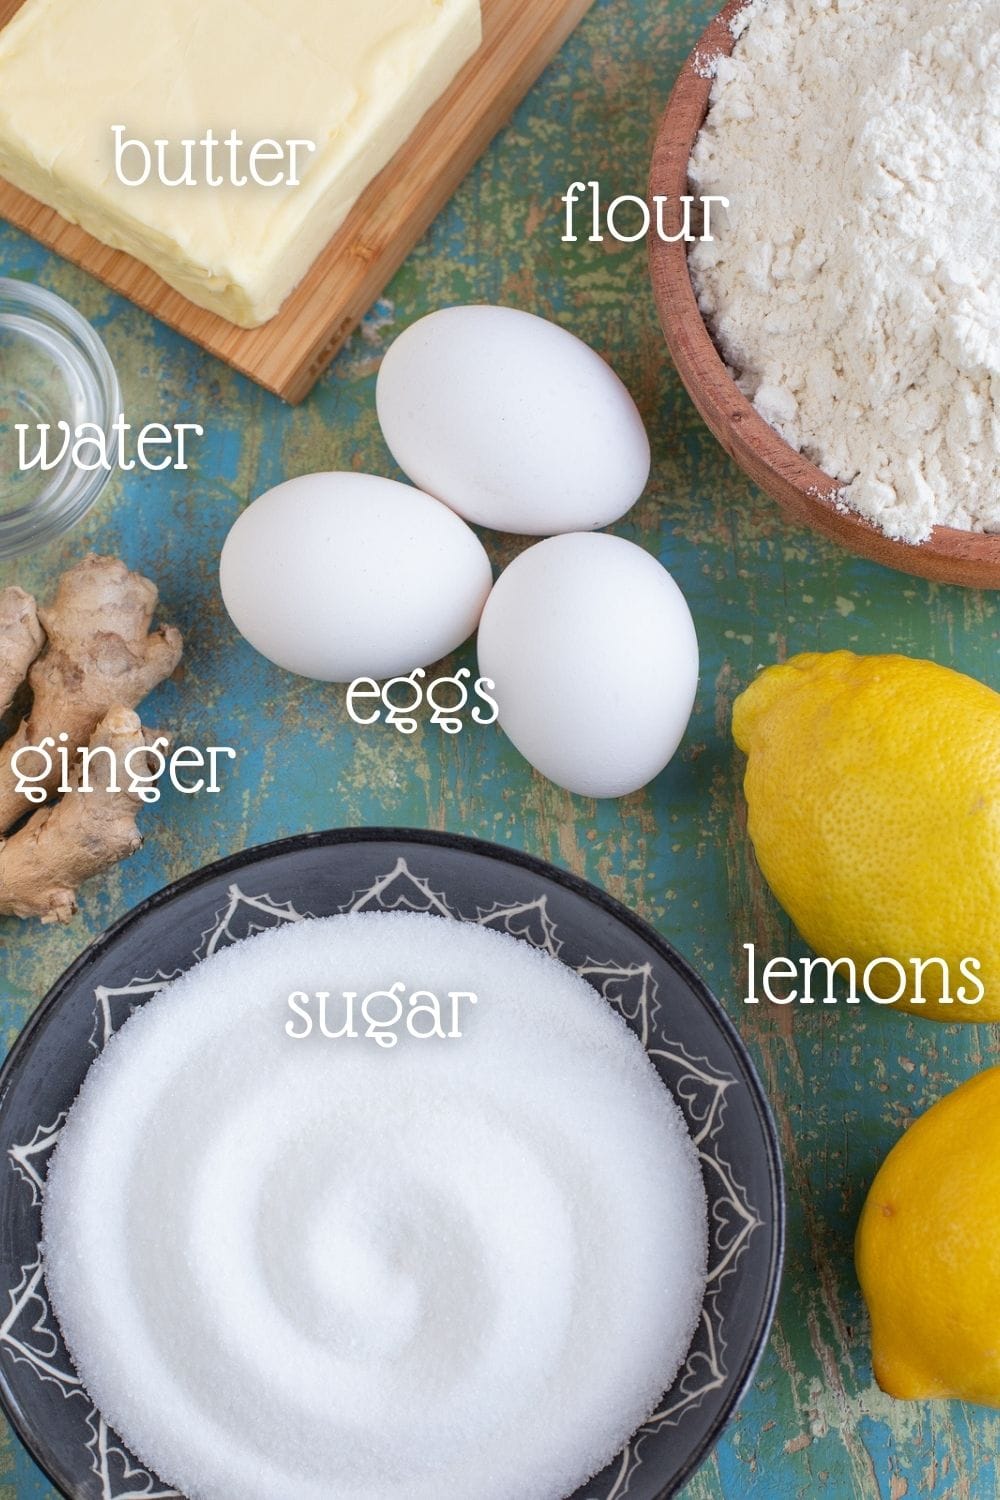 The ingredients needed to make this recipe.